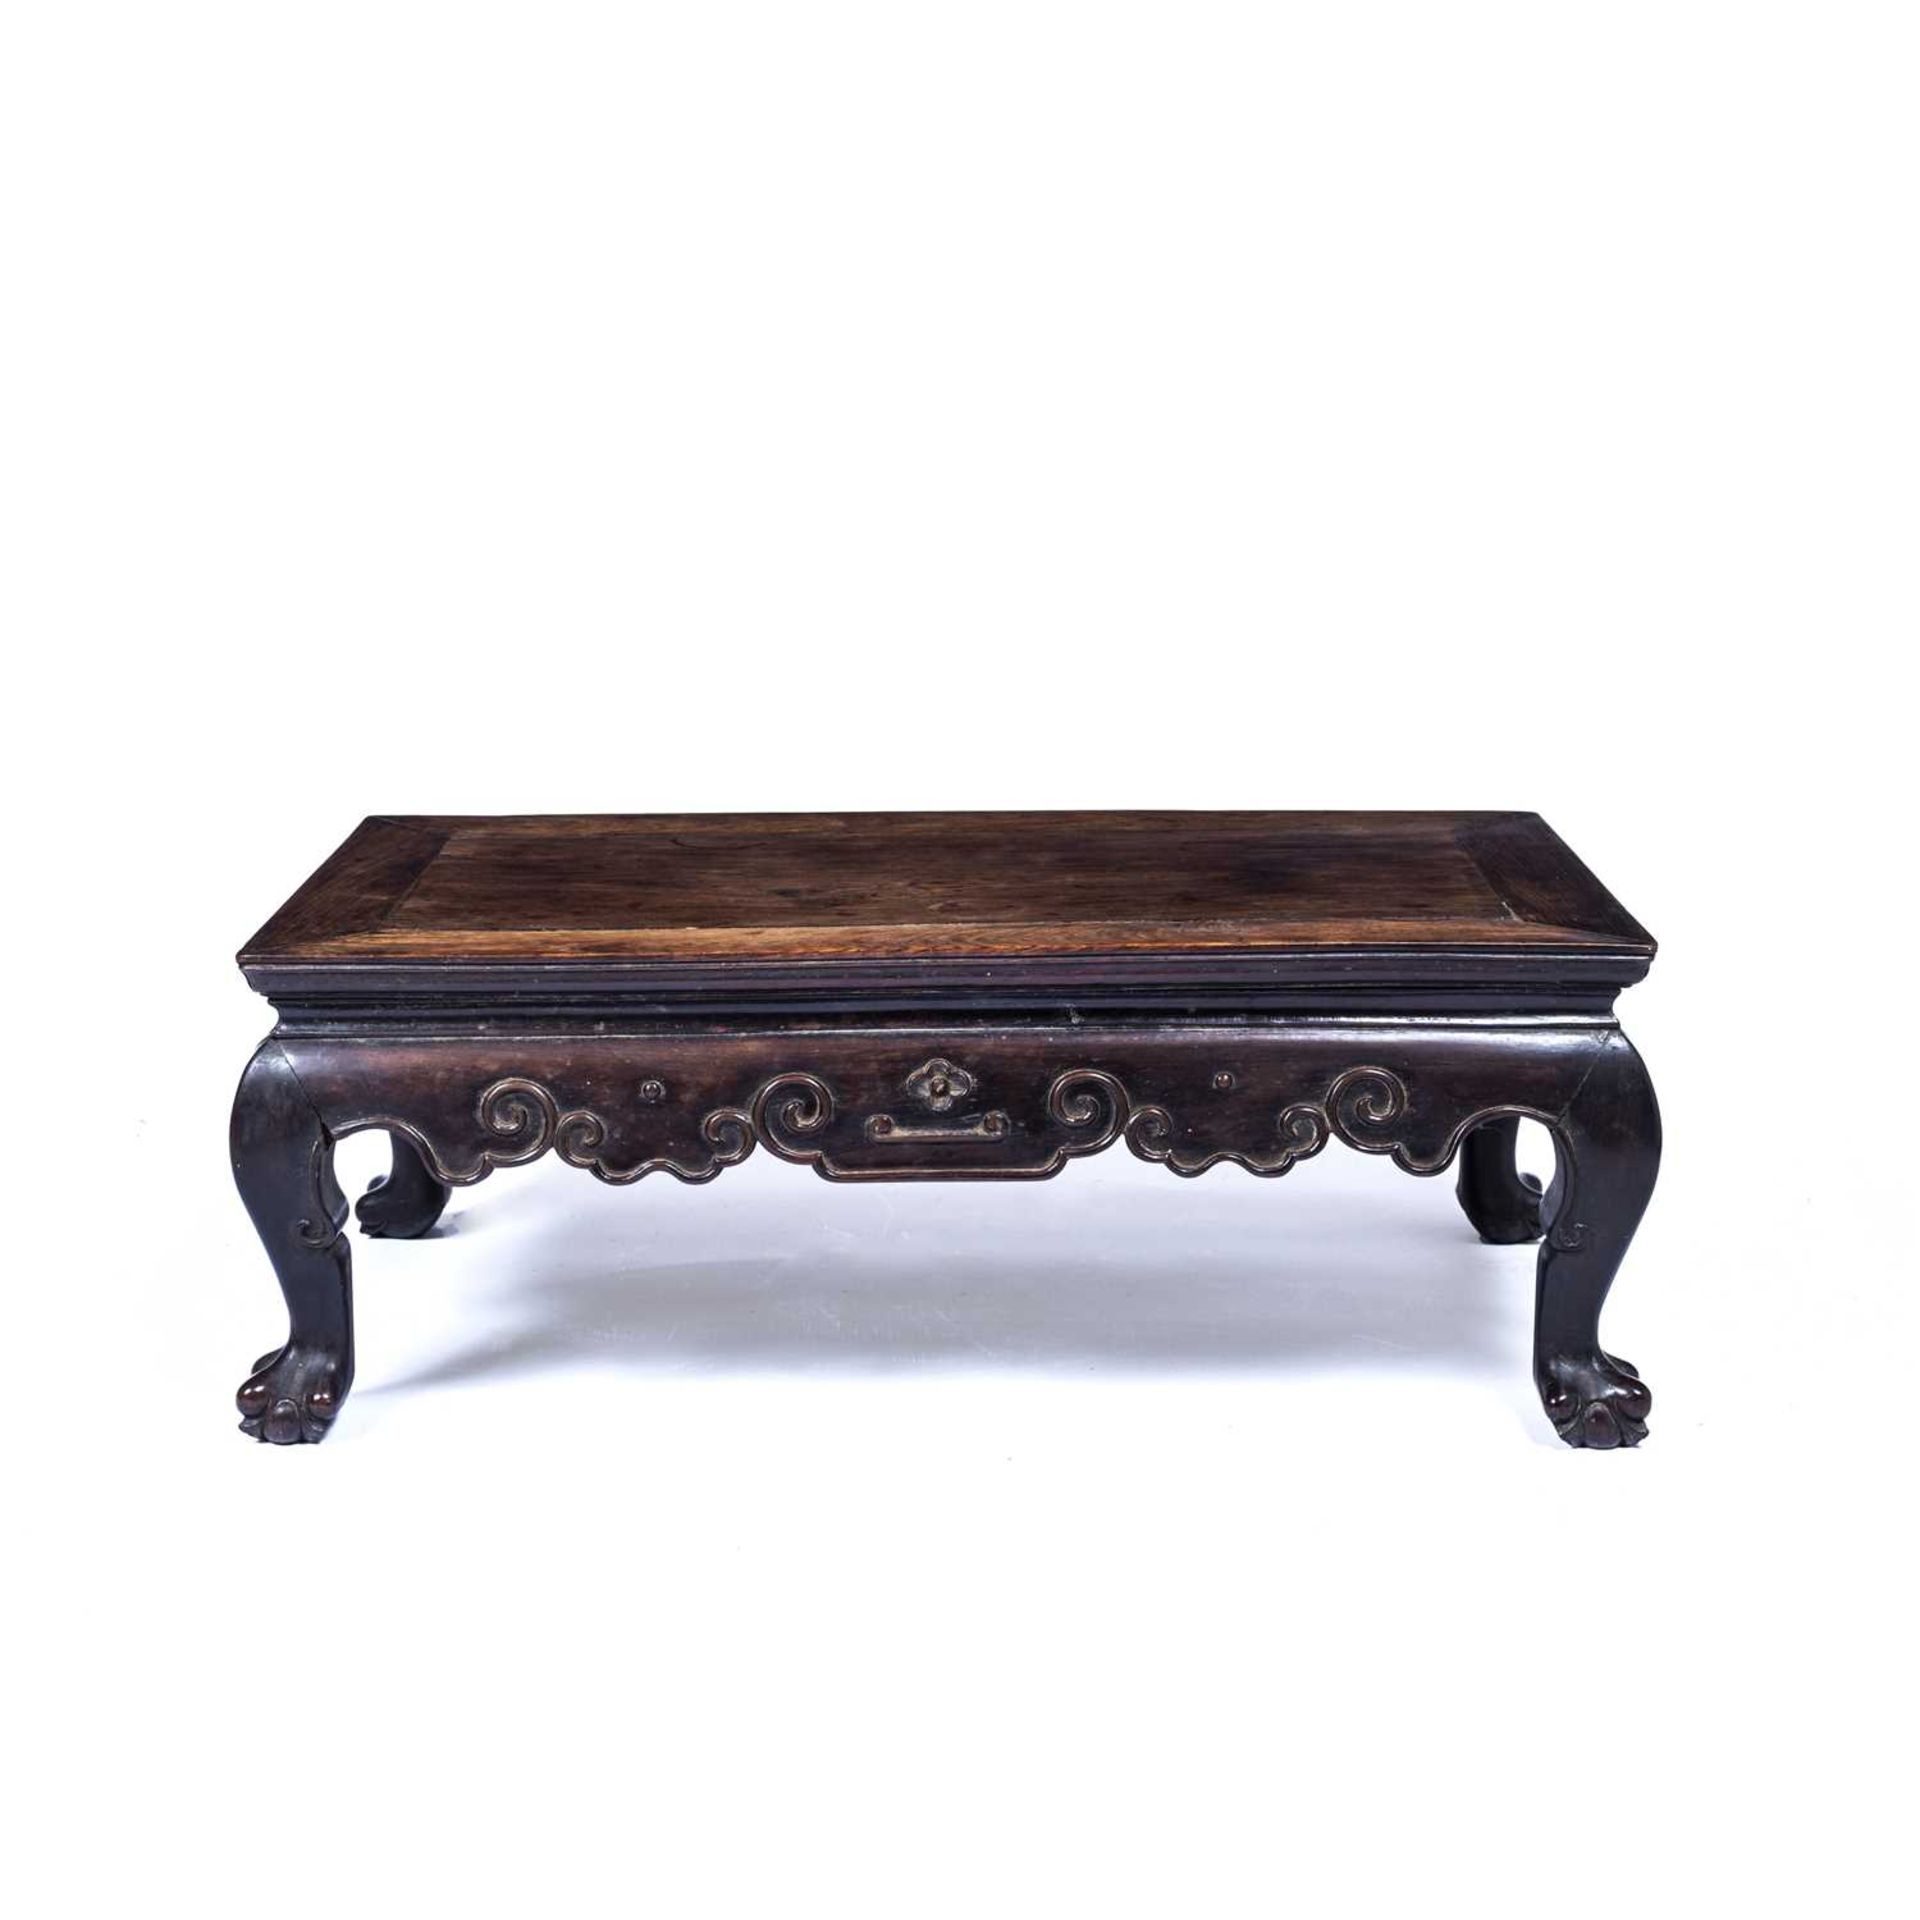 Hardwood carved 'Kang' table Chinese, with a carved under tier with cloud-shaped motifs, 76cm across